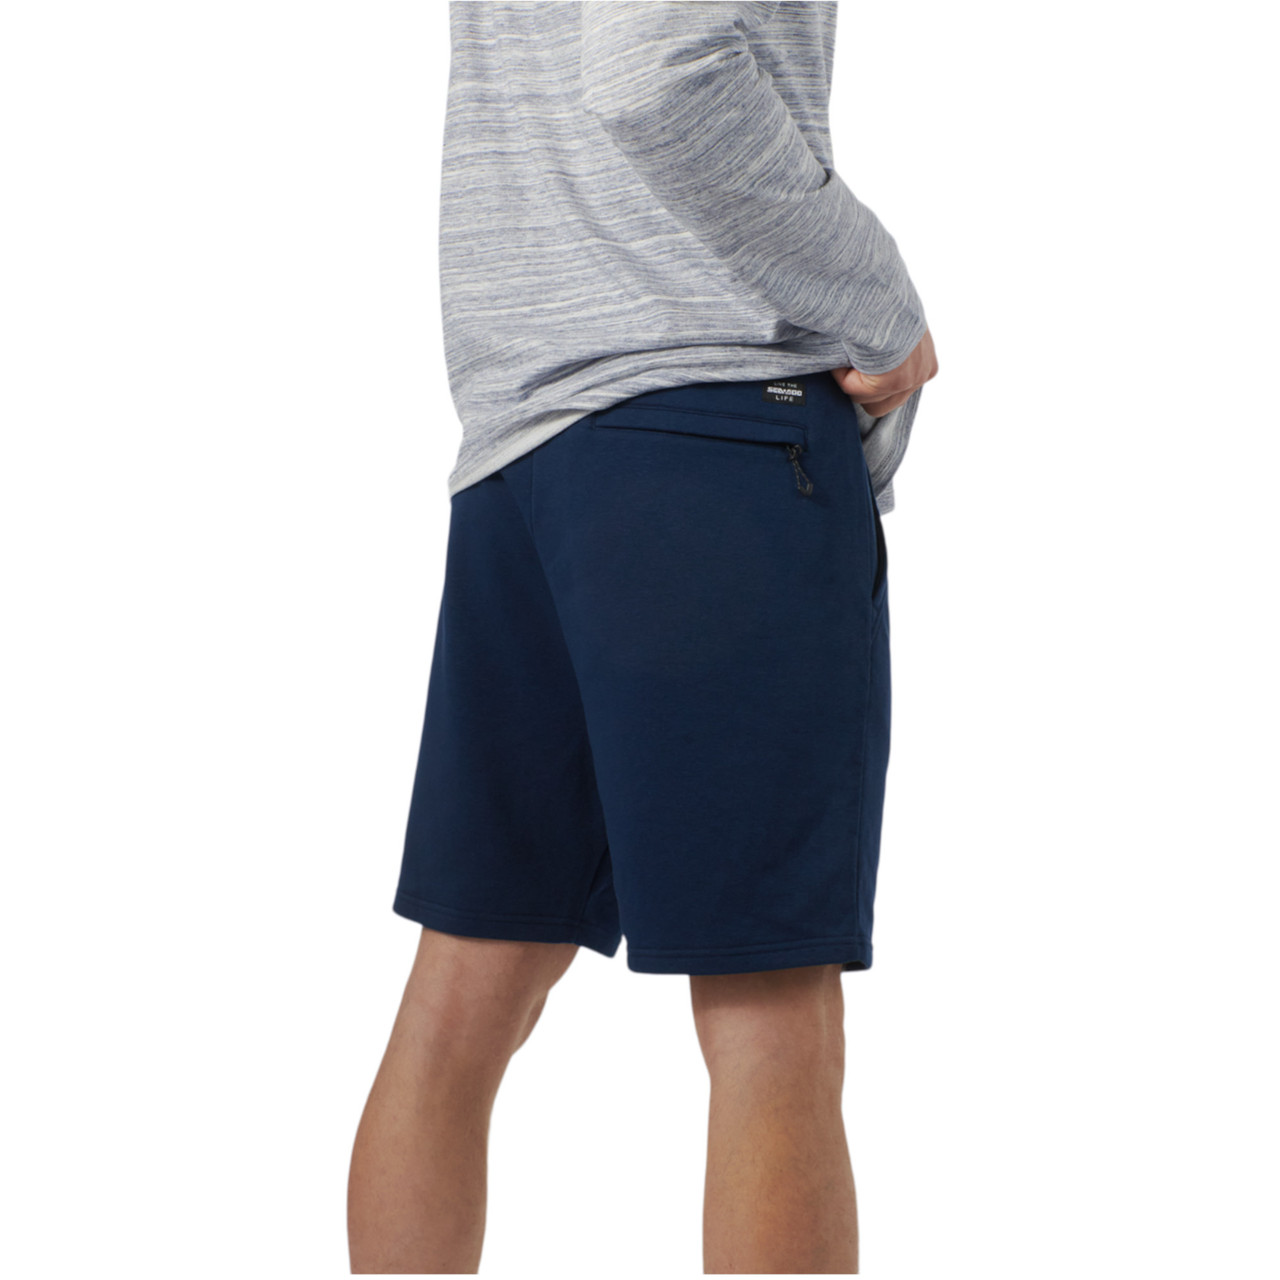 Sea-Doo New OEM, Men's Extra Large Cotton French Terry Jogger Shorts, 4547081289